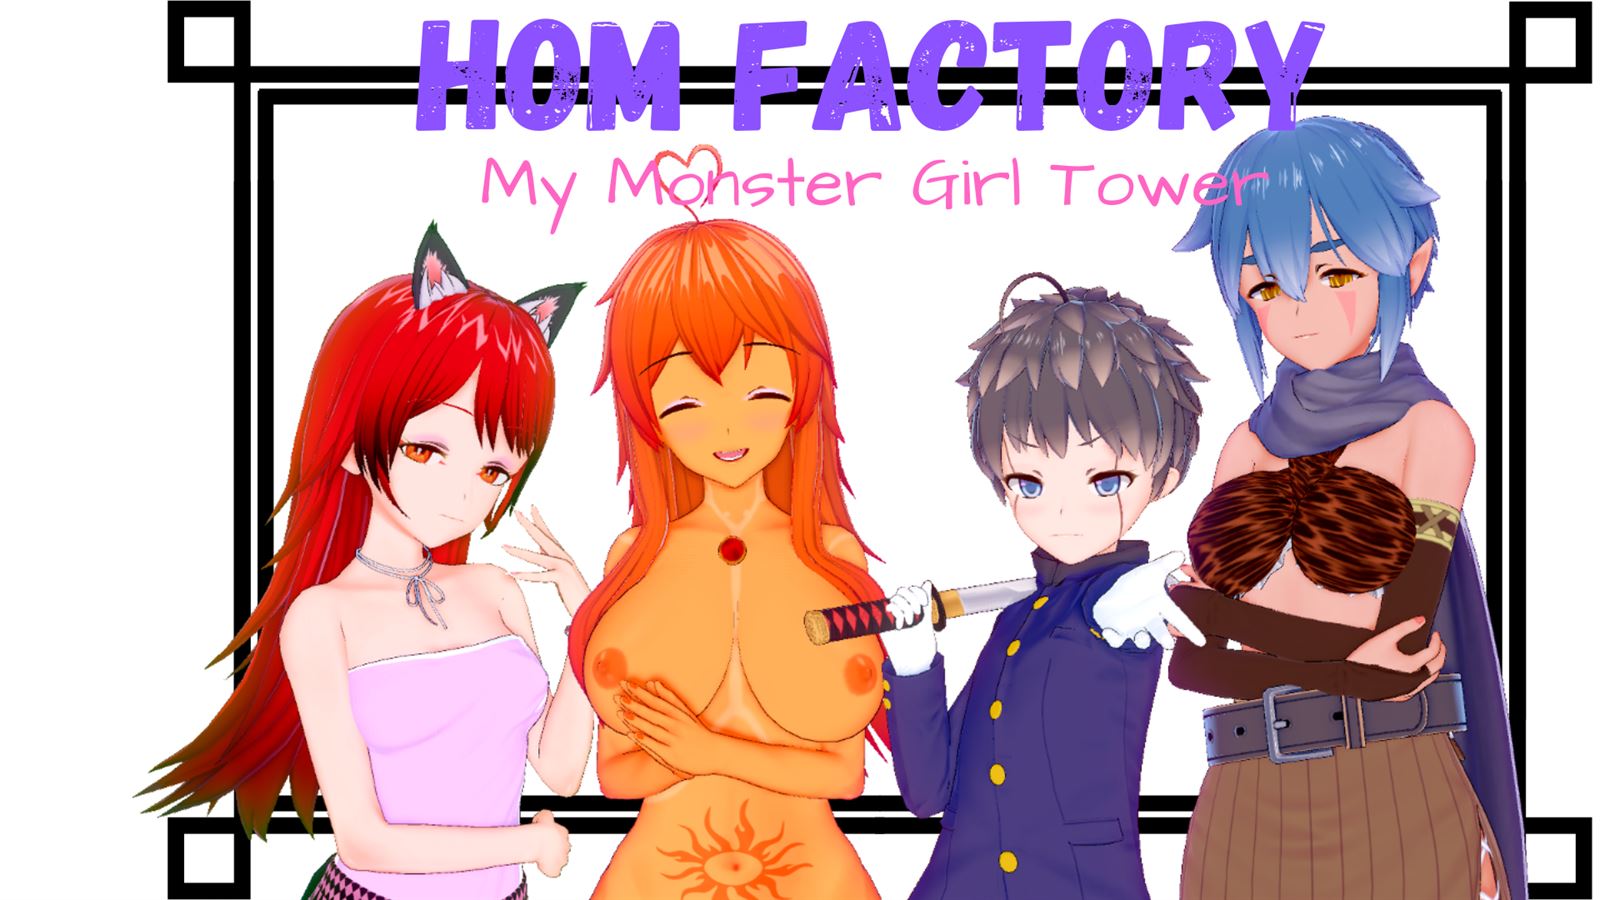 1600px x 900px - Hom Factory: My Monster Girl Tower Ren'py Porn Sex Game v.3.0.1 Download  for Windows, MacOS, Linux, Android